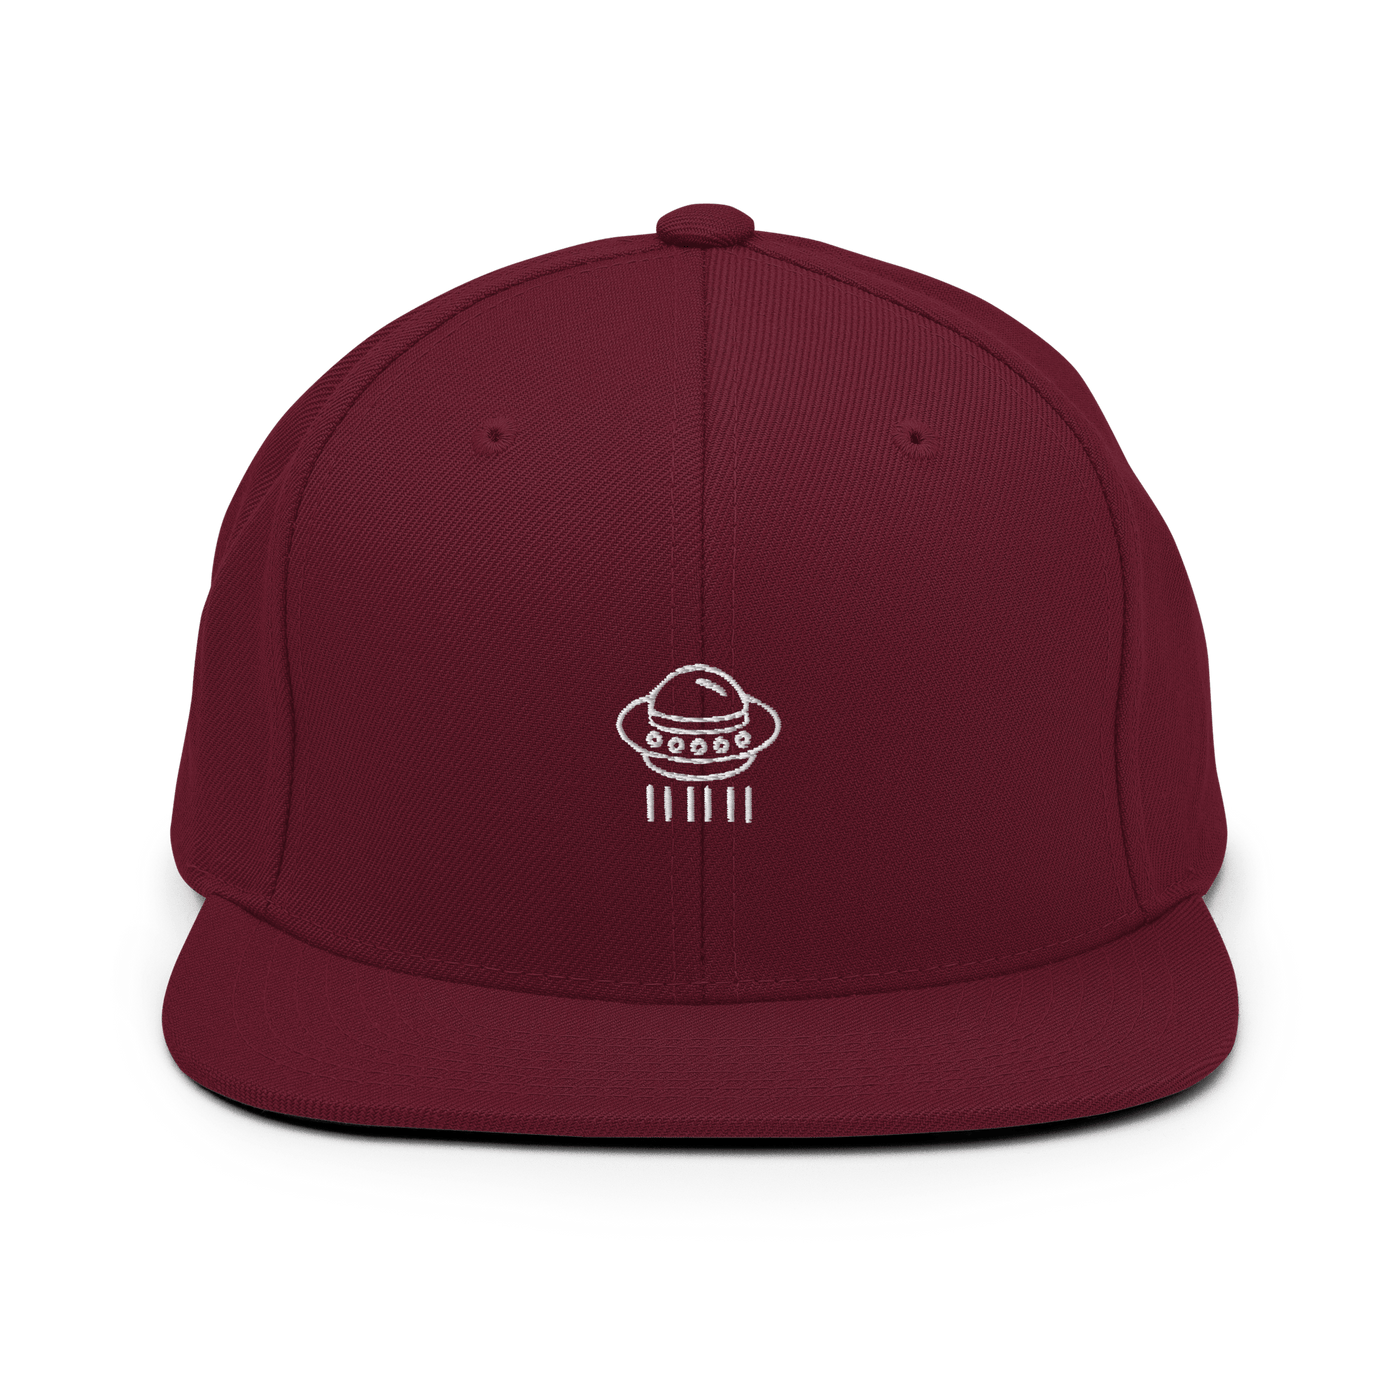 UFO Snapback Hat - Maroon - - Just Another Cap Store